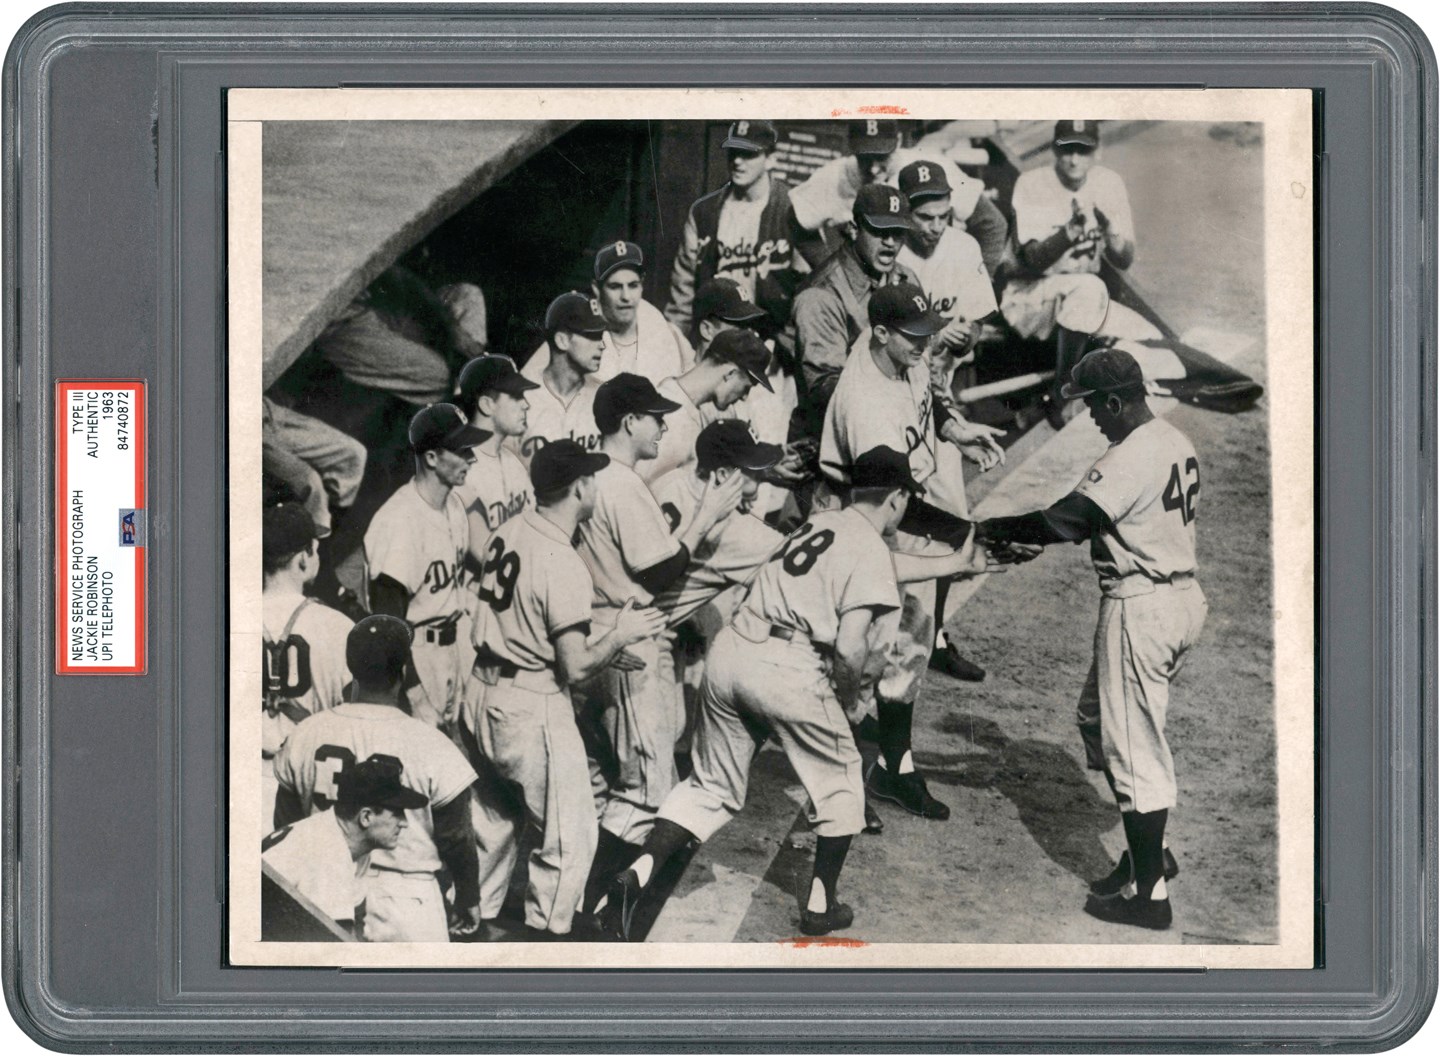 - 1951 Jackie Robinson Greeted by Teammates Photograph (PSA Type III)